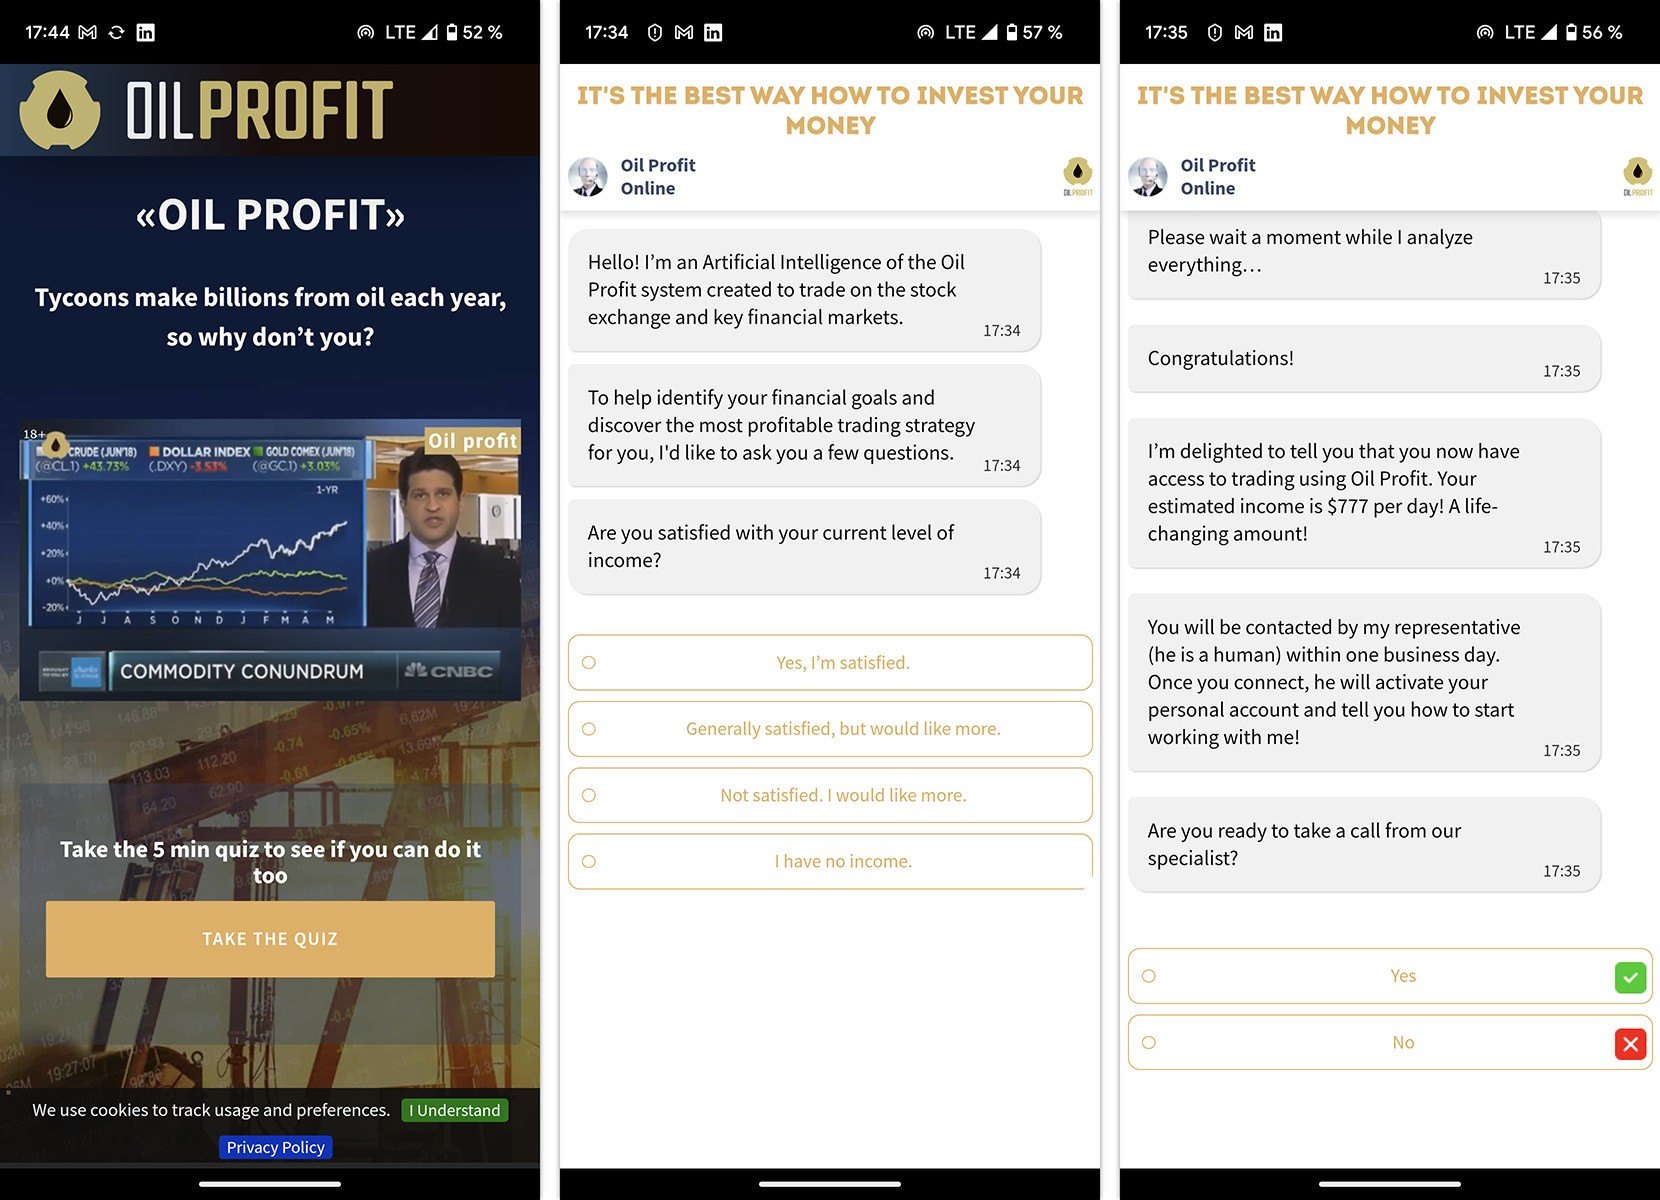 What goes on in the scam Oil Profit app